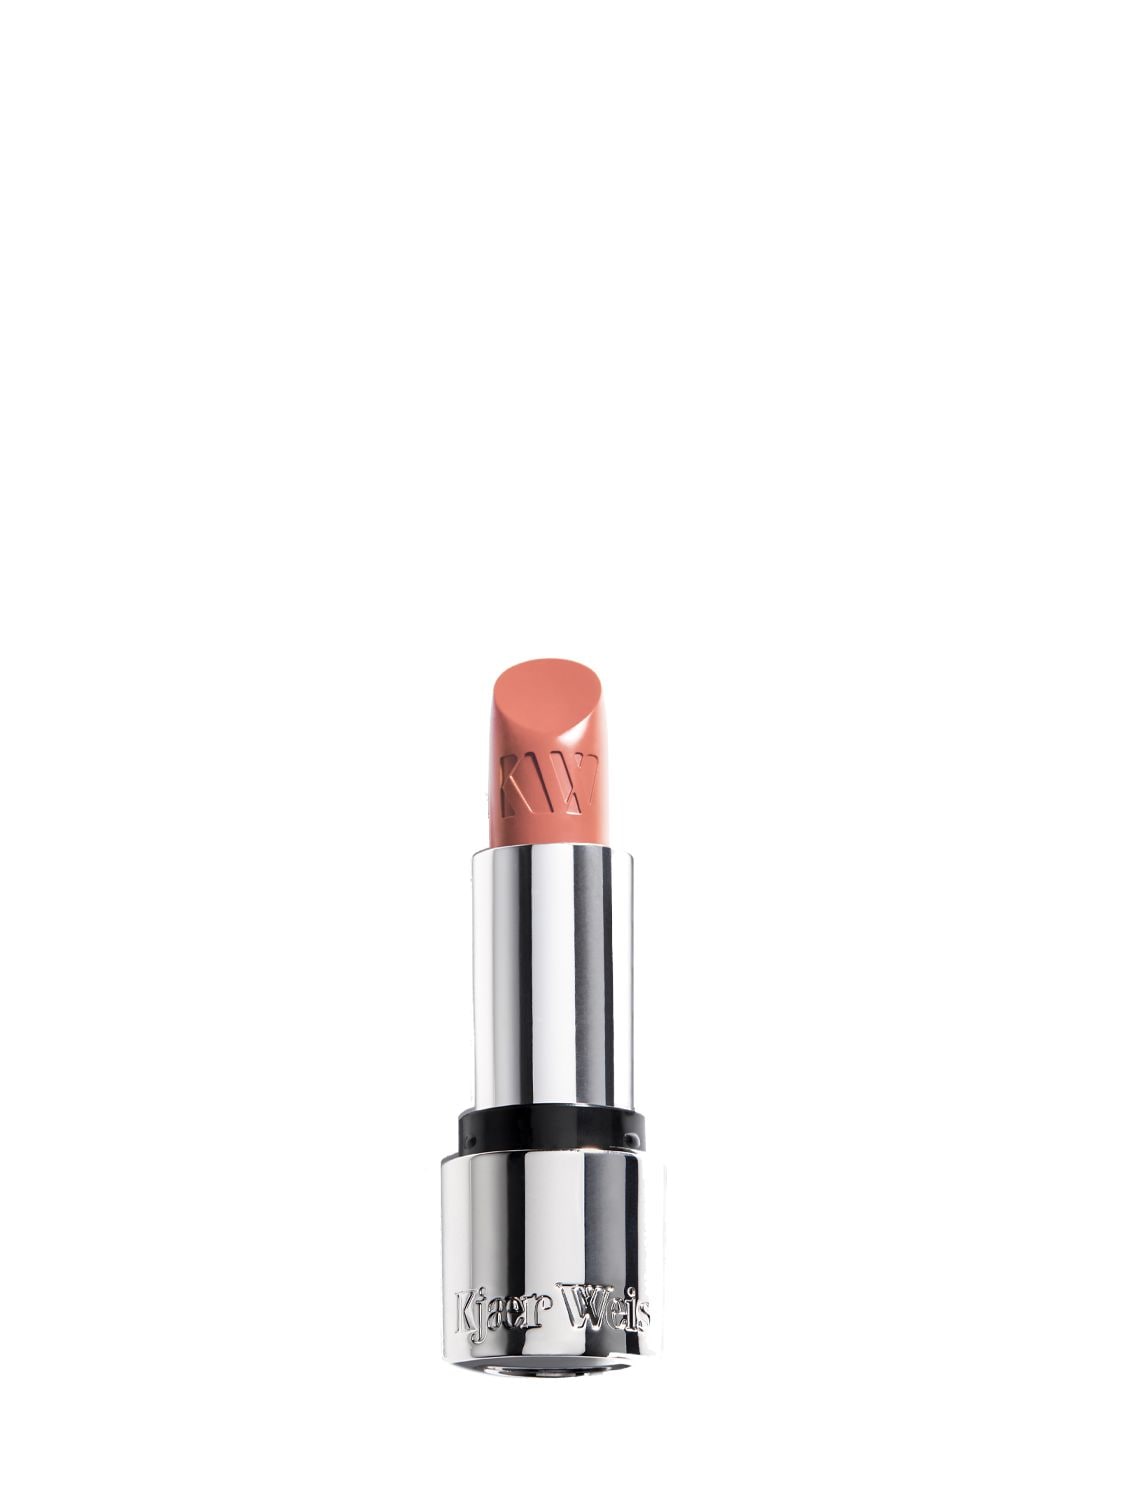 Image of Nude Lipstick Compact